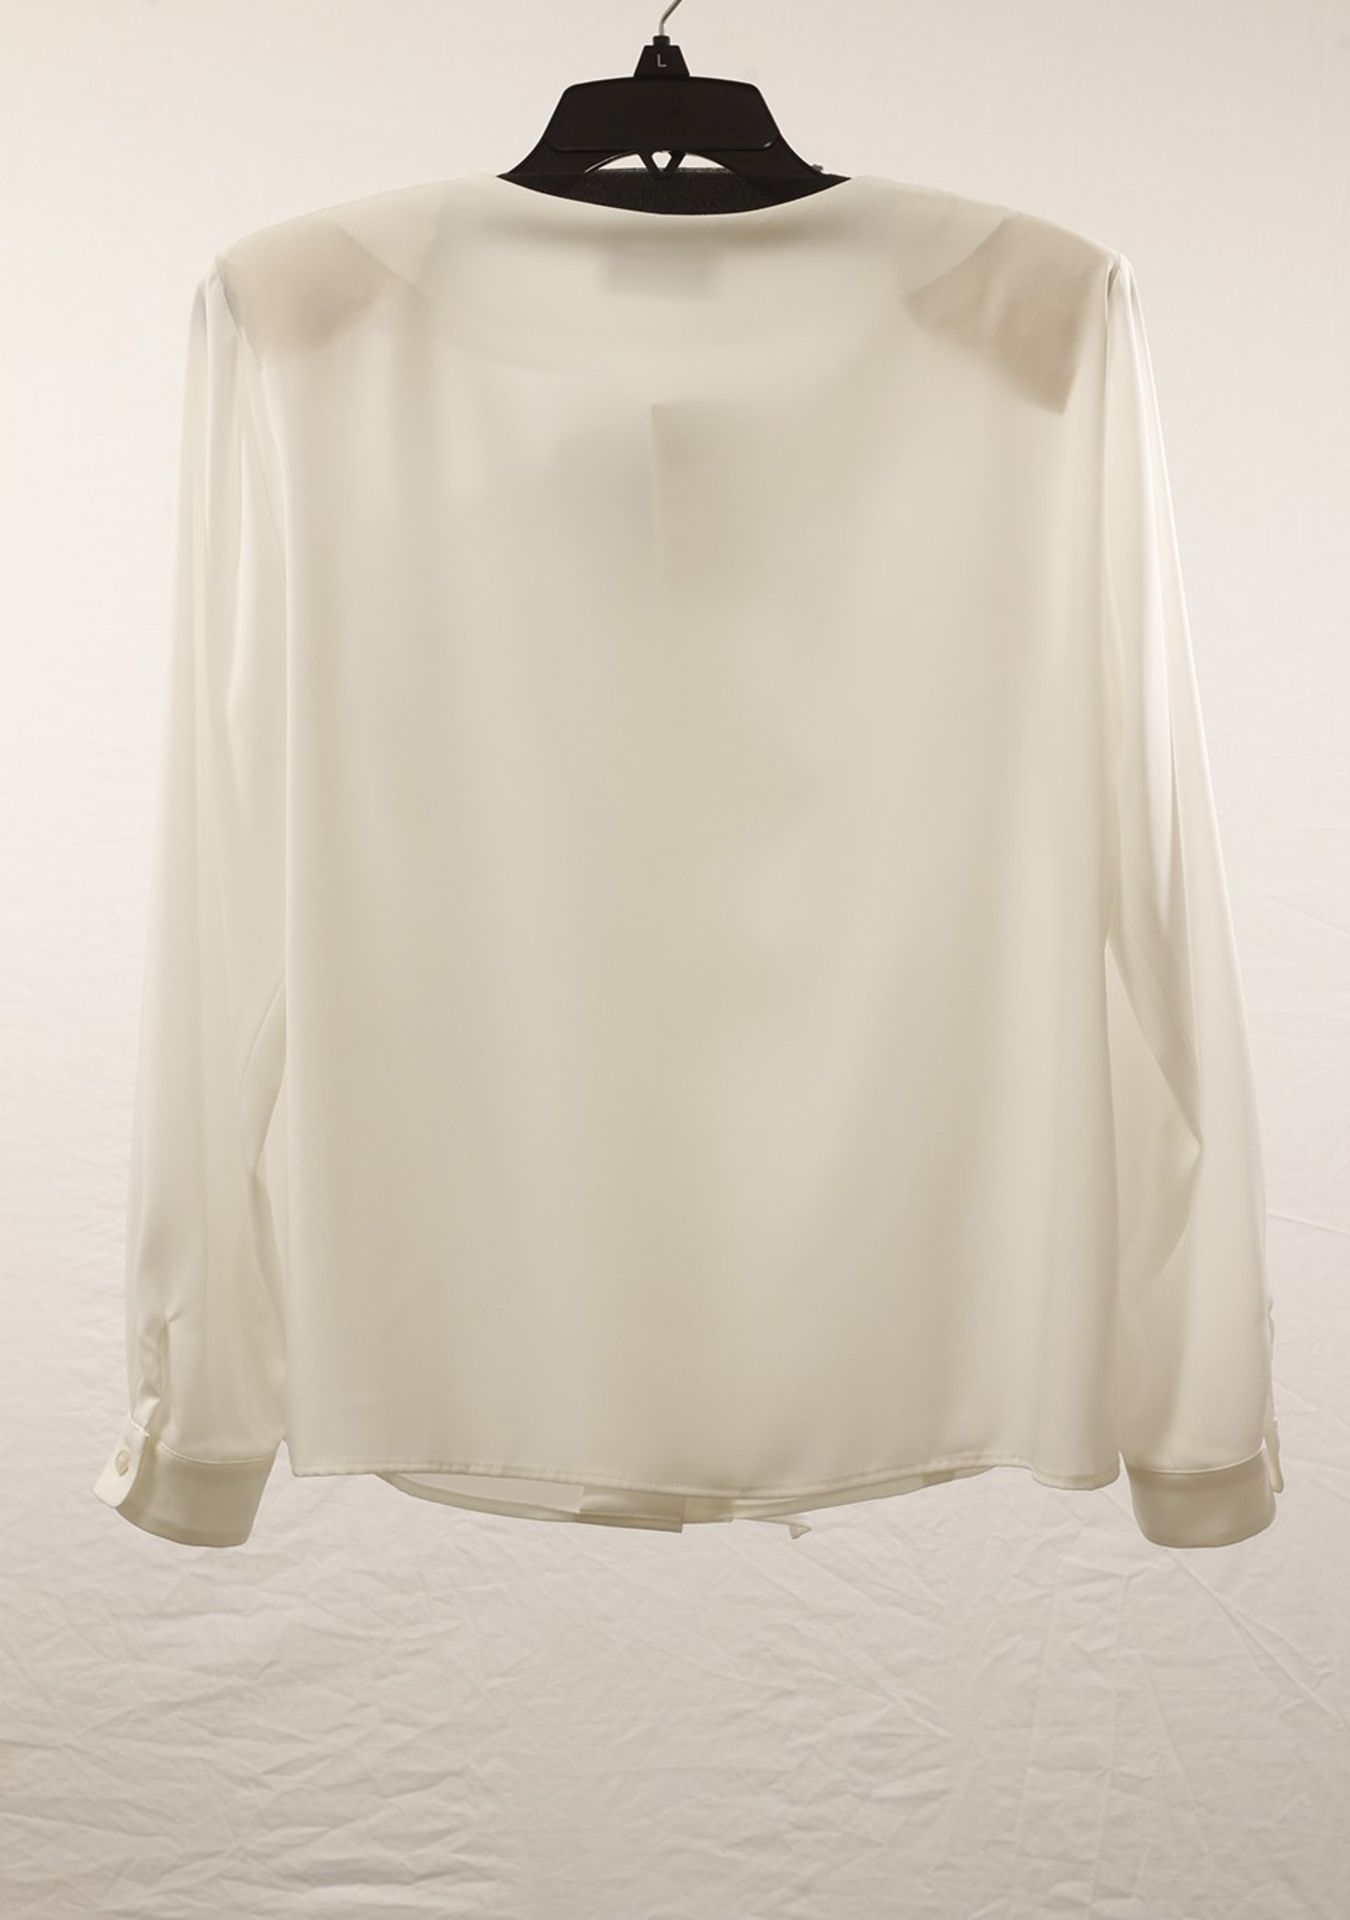 1 x Anne Belin White Shirt - Size: 18 - Material: 100% Polyester - From a High End Clothing Boutique - Image 5 of 9